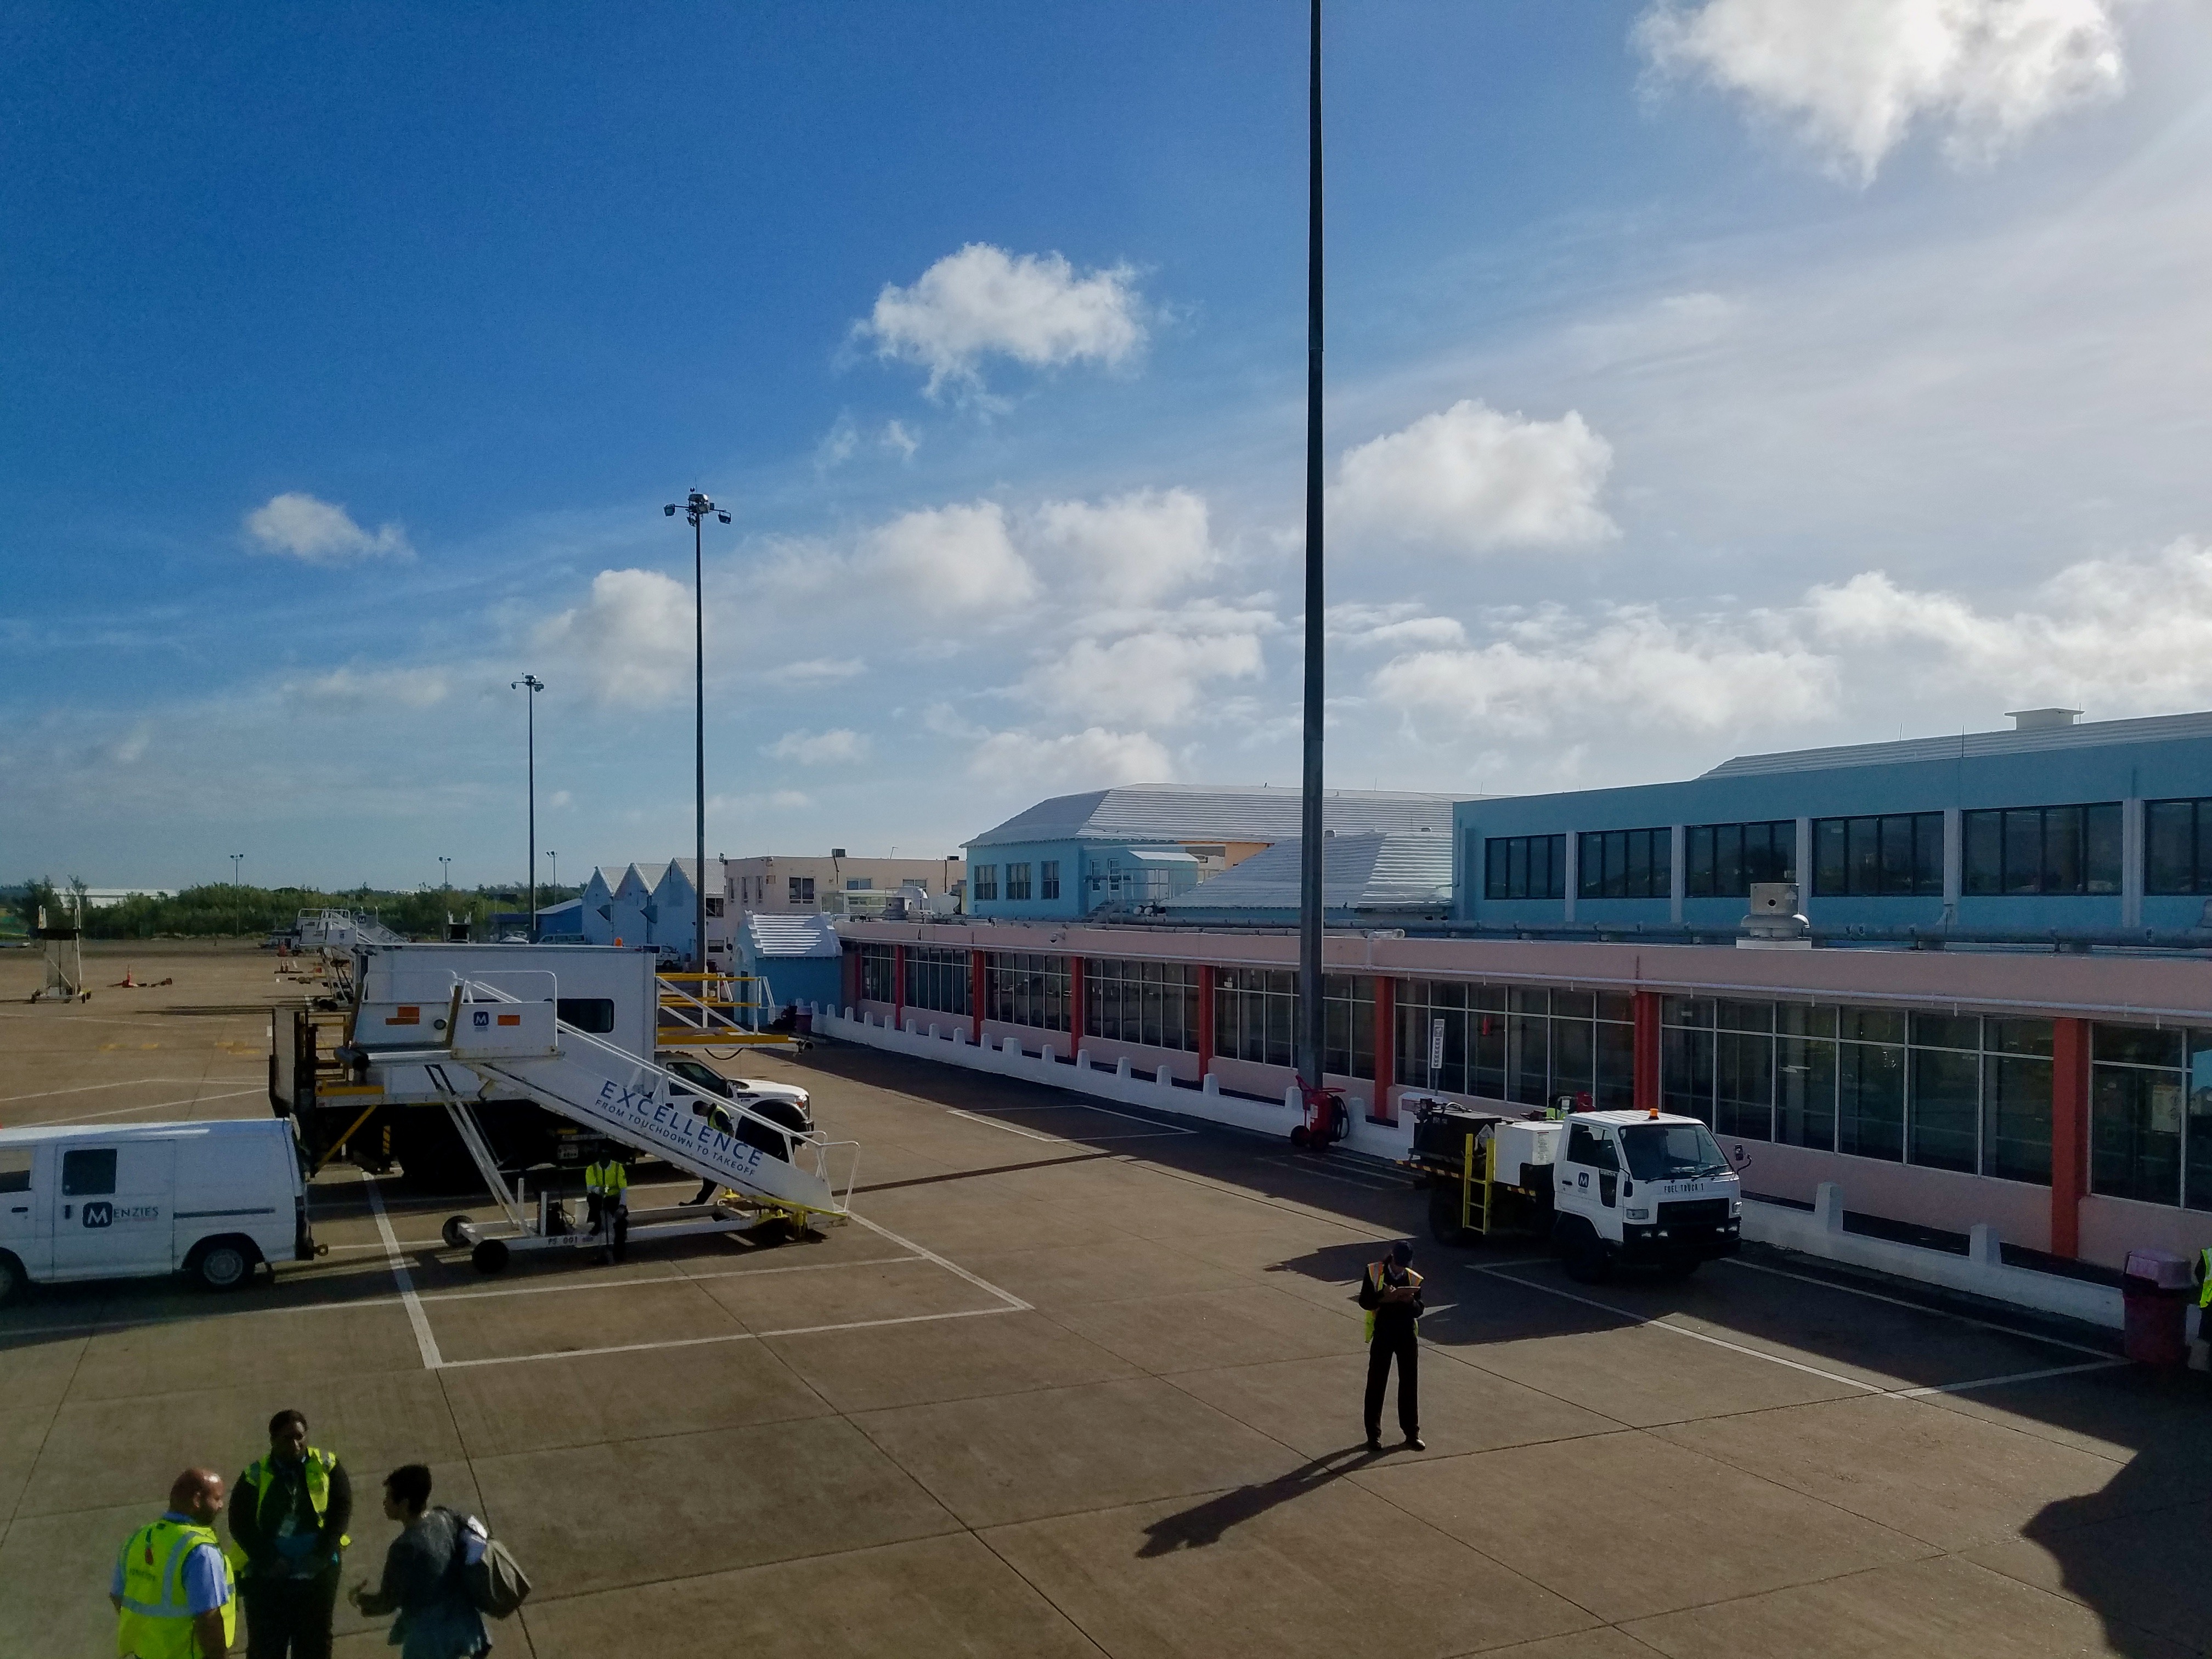 The Airport in St. George's, Bermuda